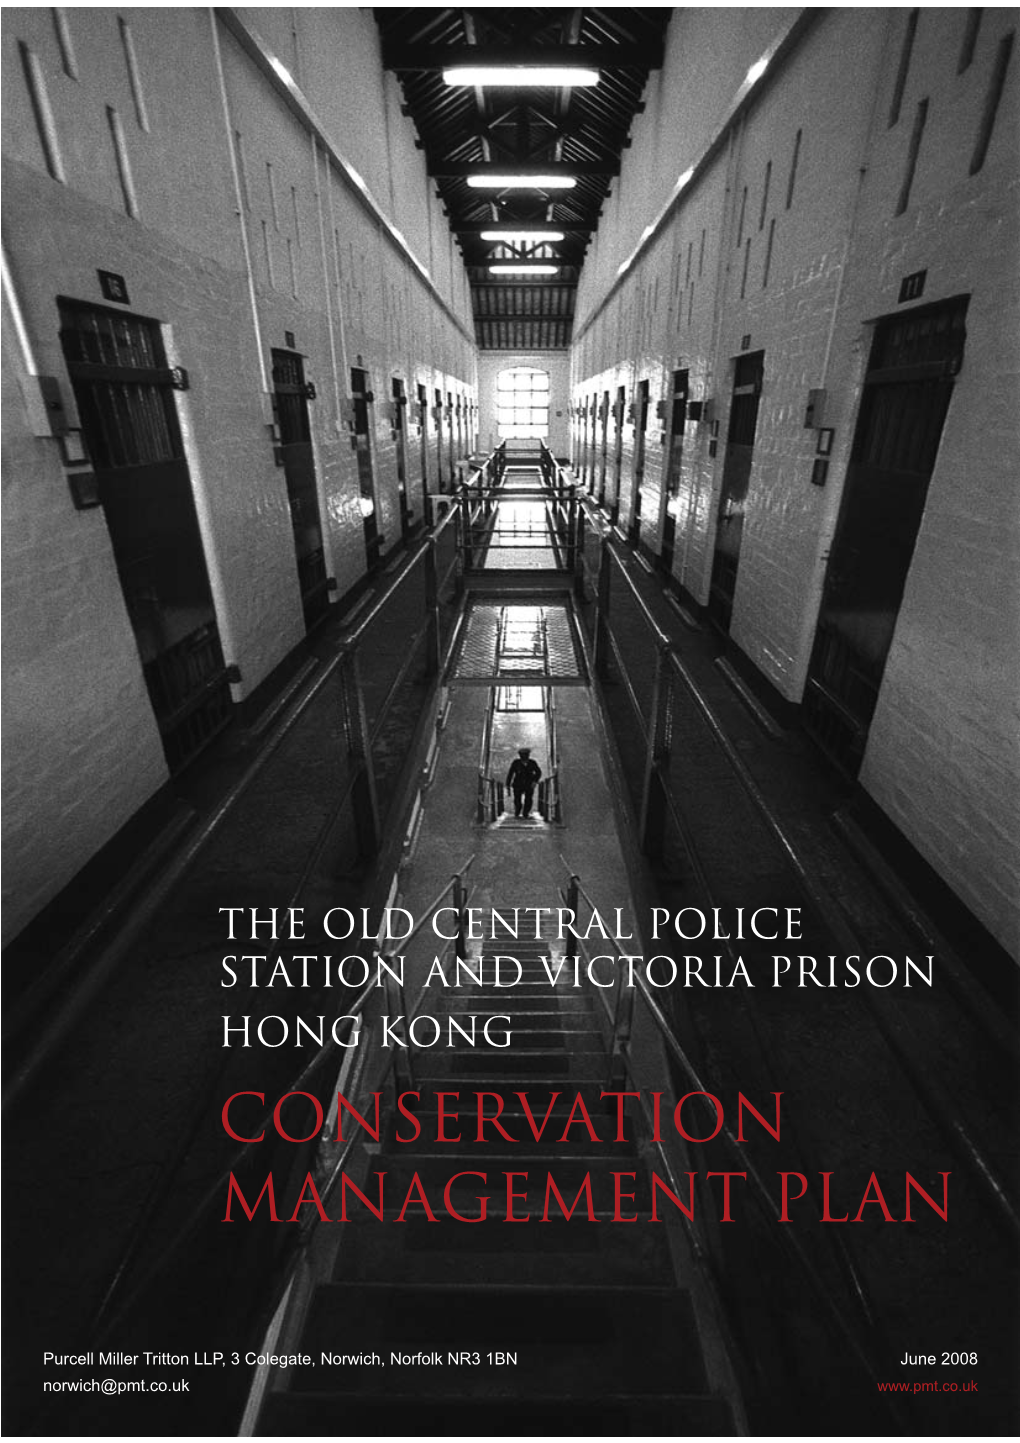 The Old Central Police Station and Victoria Prison Hong Kong Conservation Management Plan